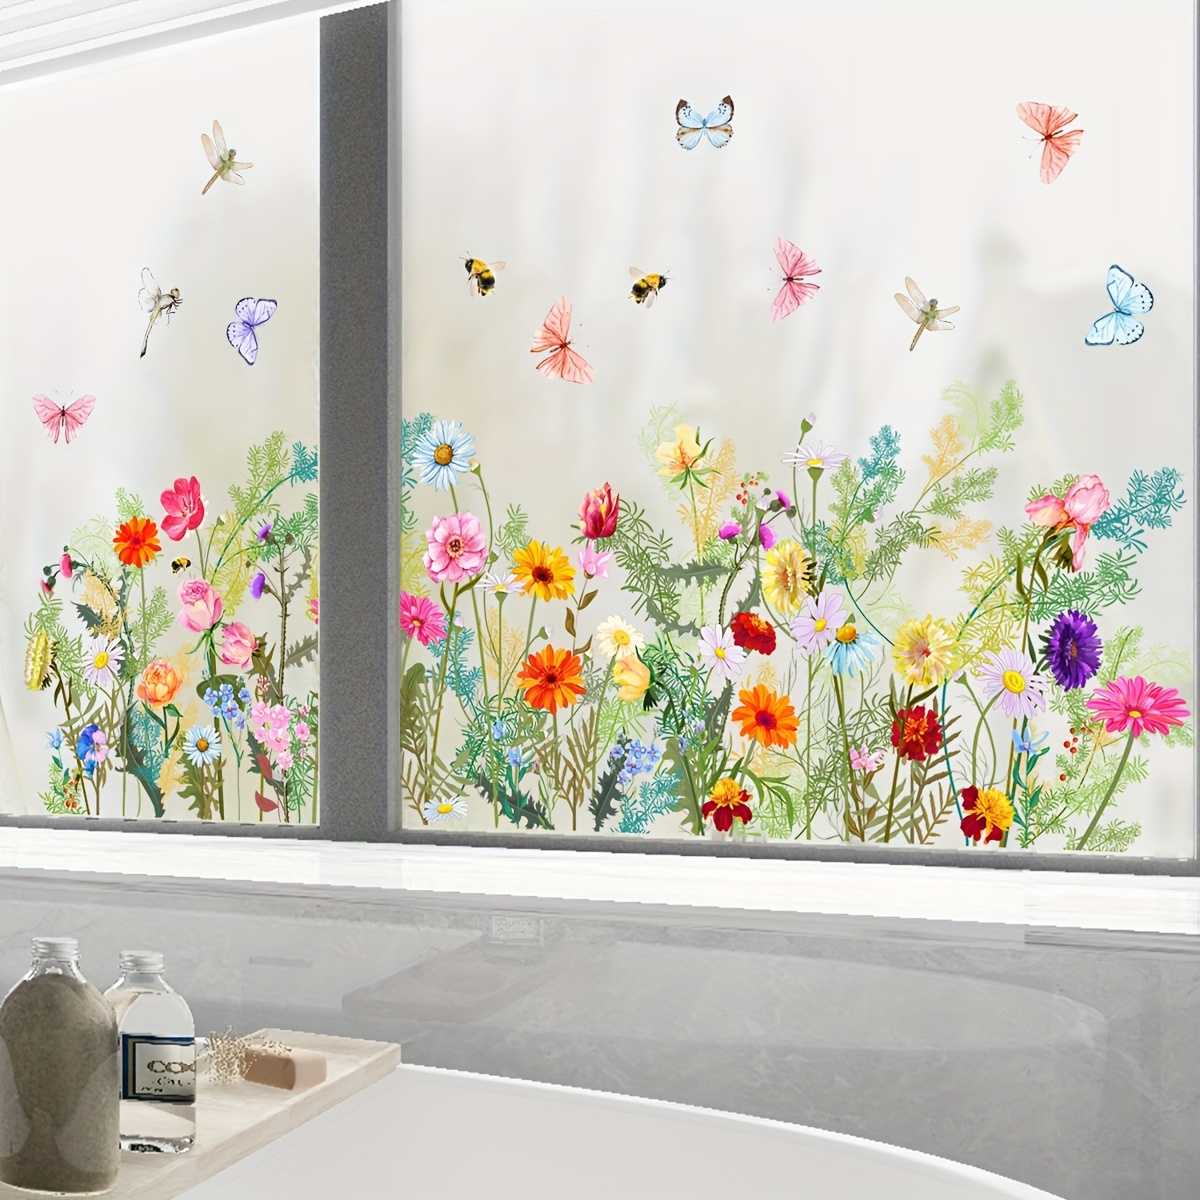 

1pc Flower And Butterfly Window Cling, Cartoon Floral Sticker, Decorative Plastic Decal For Bedroom, Balcony, Glass Window & Showcase Decor, Aesthetic Home Decoration, Room Decor, Beautify Your Home